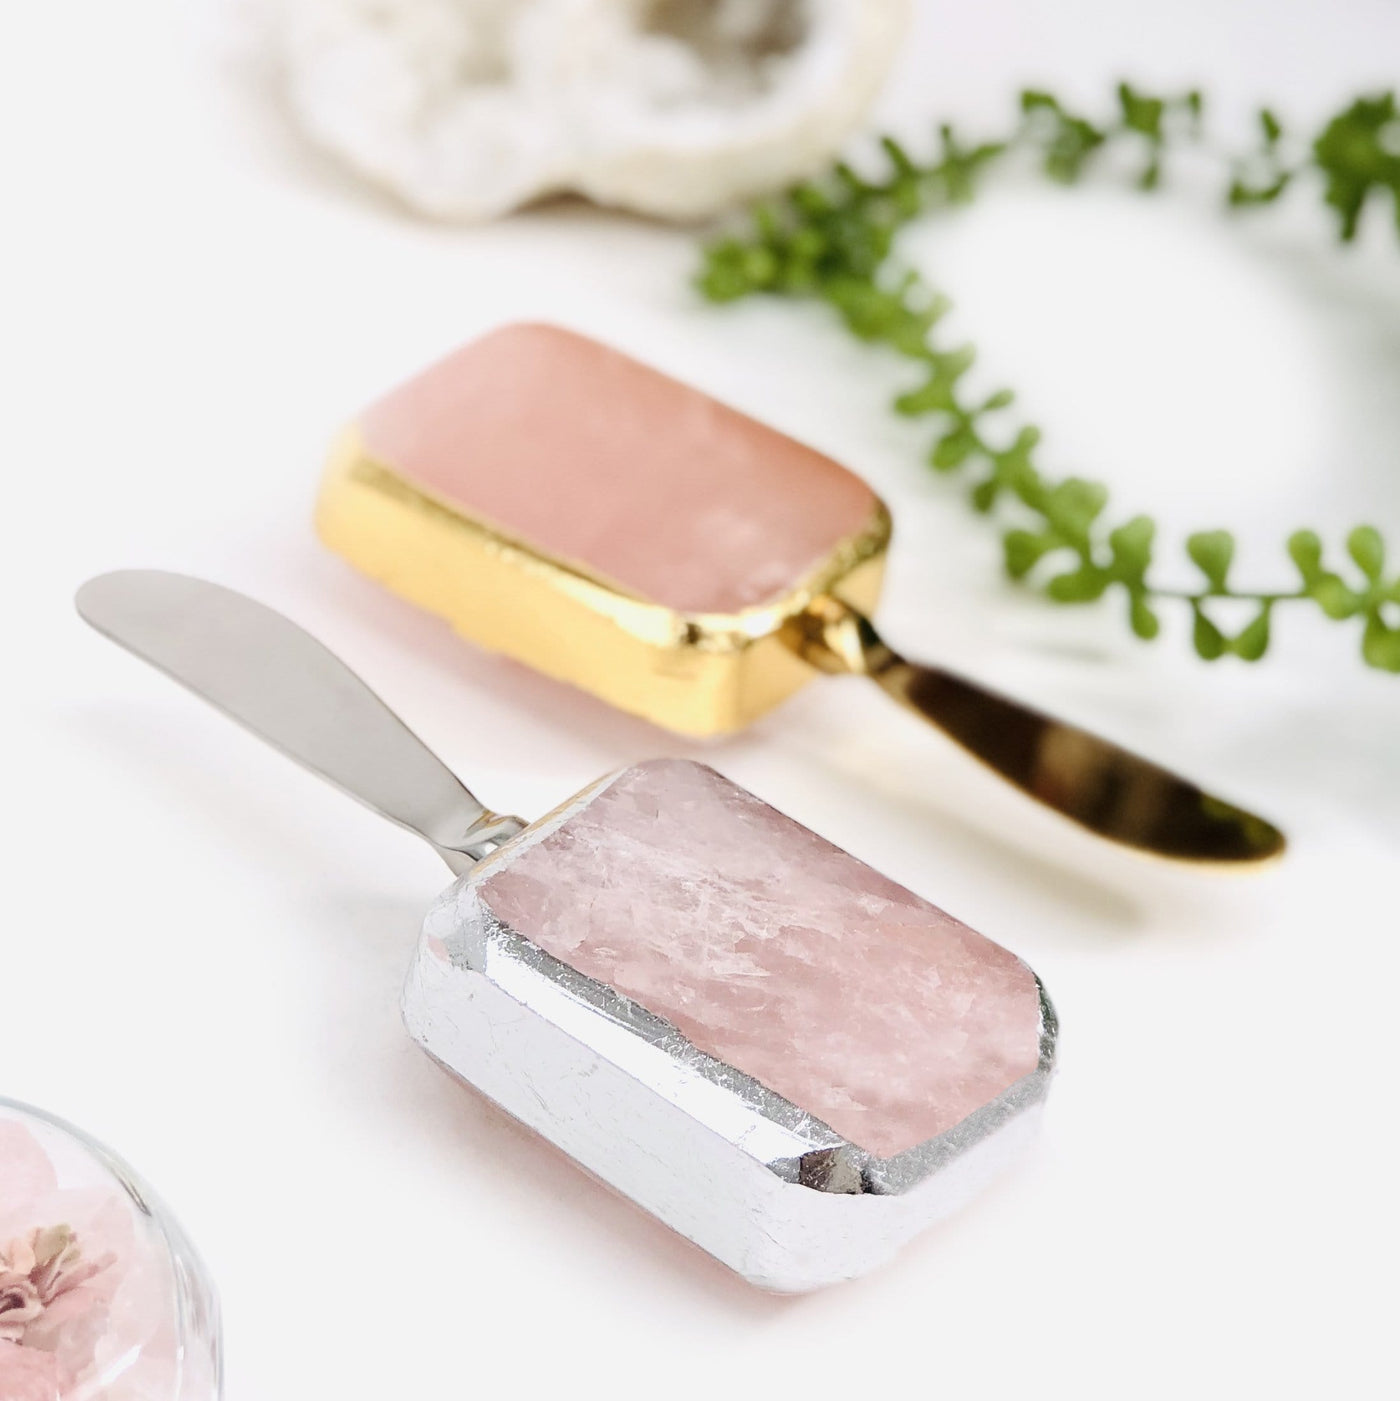 Up close shot of 2 Rose Quartz Butter Spreaders with plants blurred in the background